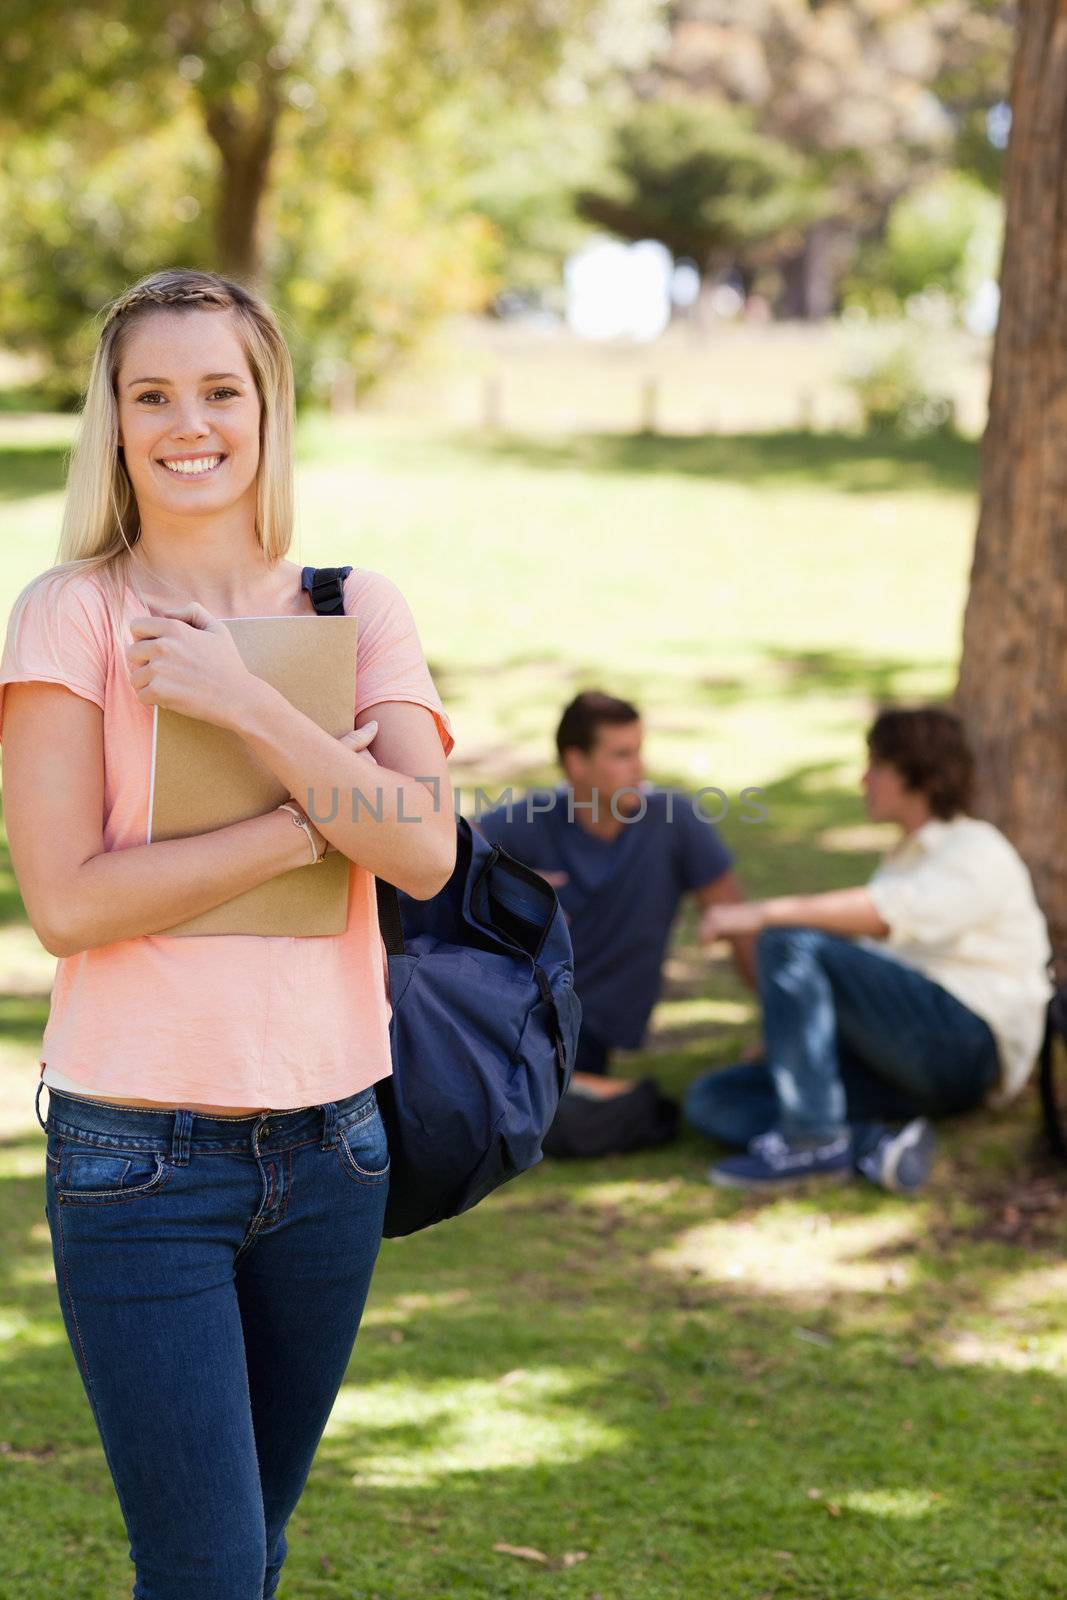 Smiling female holding a textbook in a park with friends in background